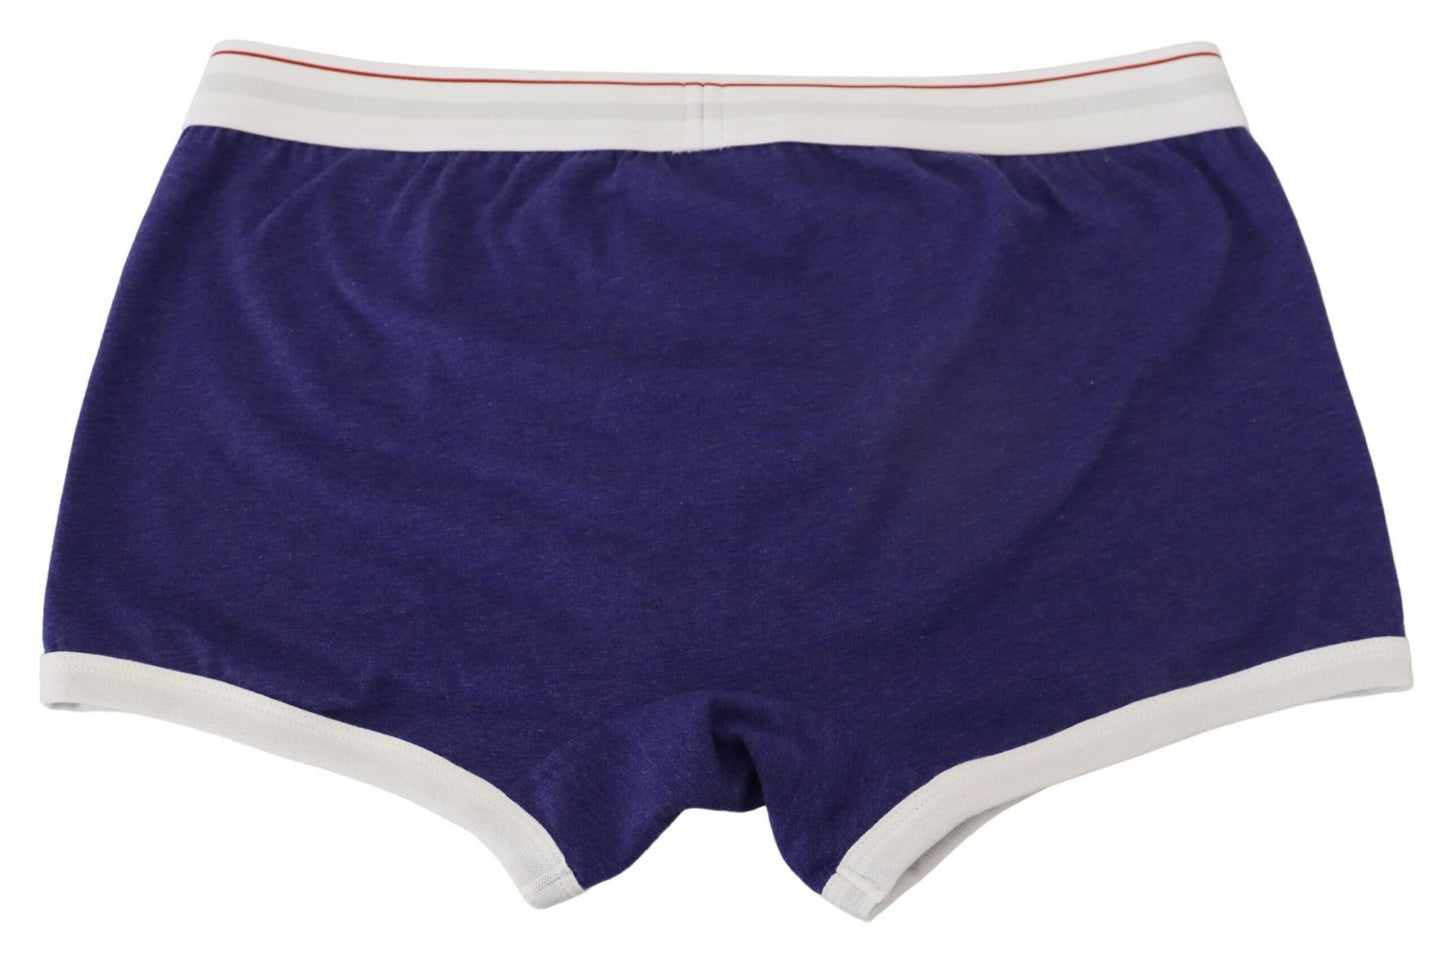 Blue White Logo Cotton Stretch Men Trunk Underwear - Designed by Dsquared² Available to Buy at a Discounted Price on Moon Behind The Hill Online Designer Discount Store